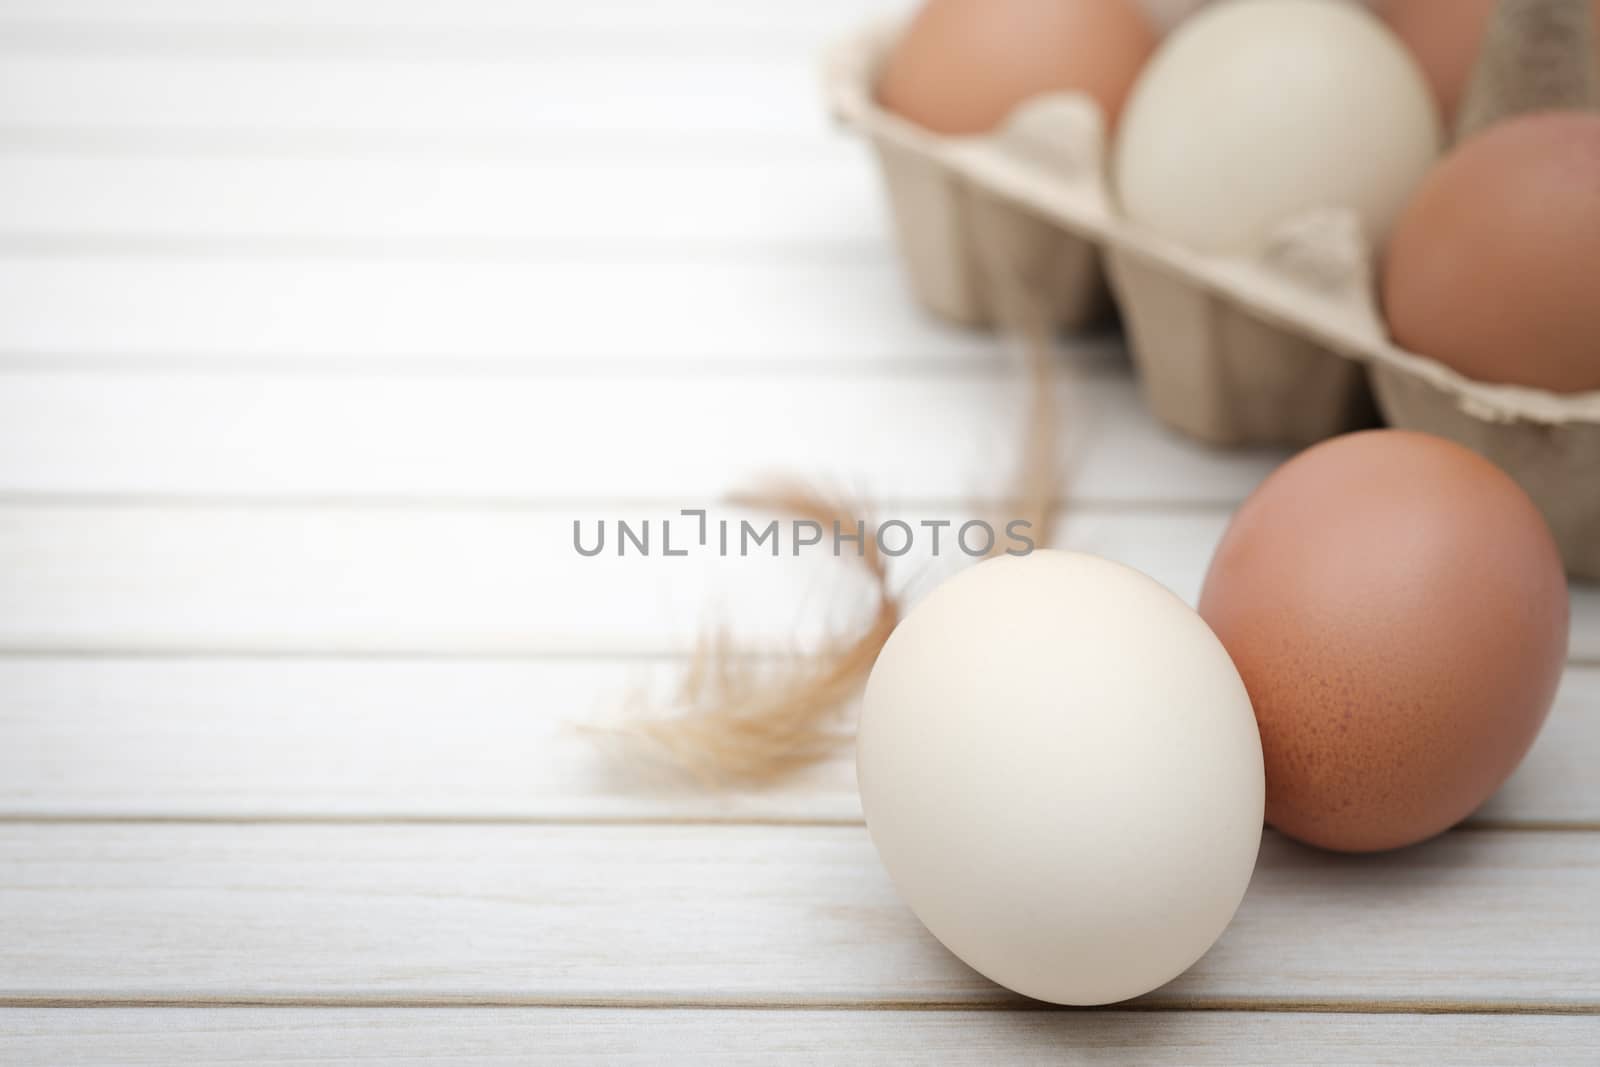 Still life-Eggs on caton box arranged in a white rustick scene, Egg is beneficial to the body, Food concept, with copy space.